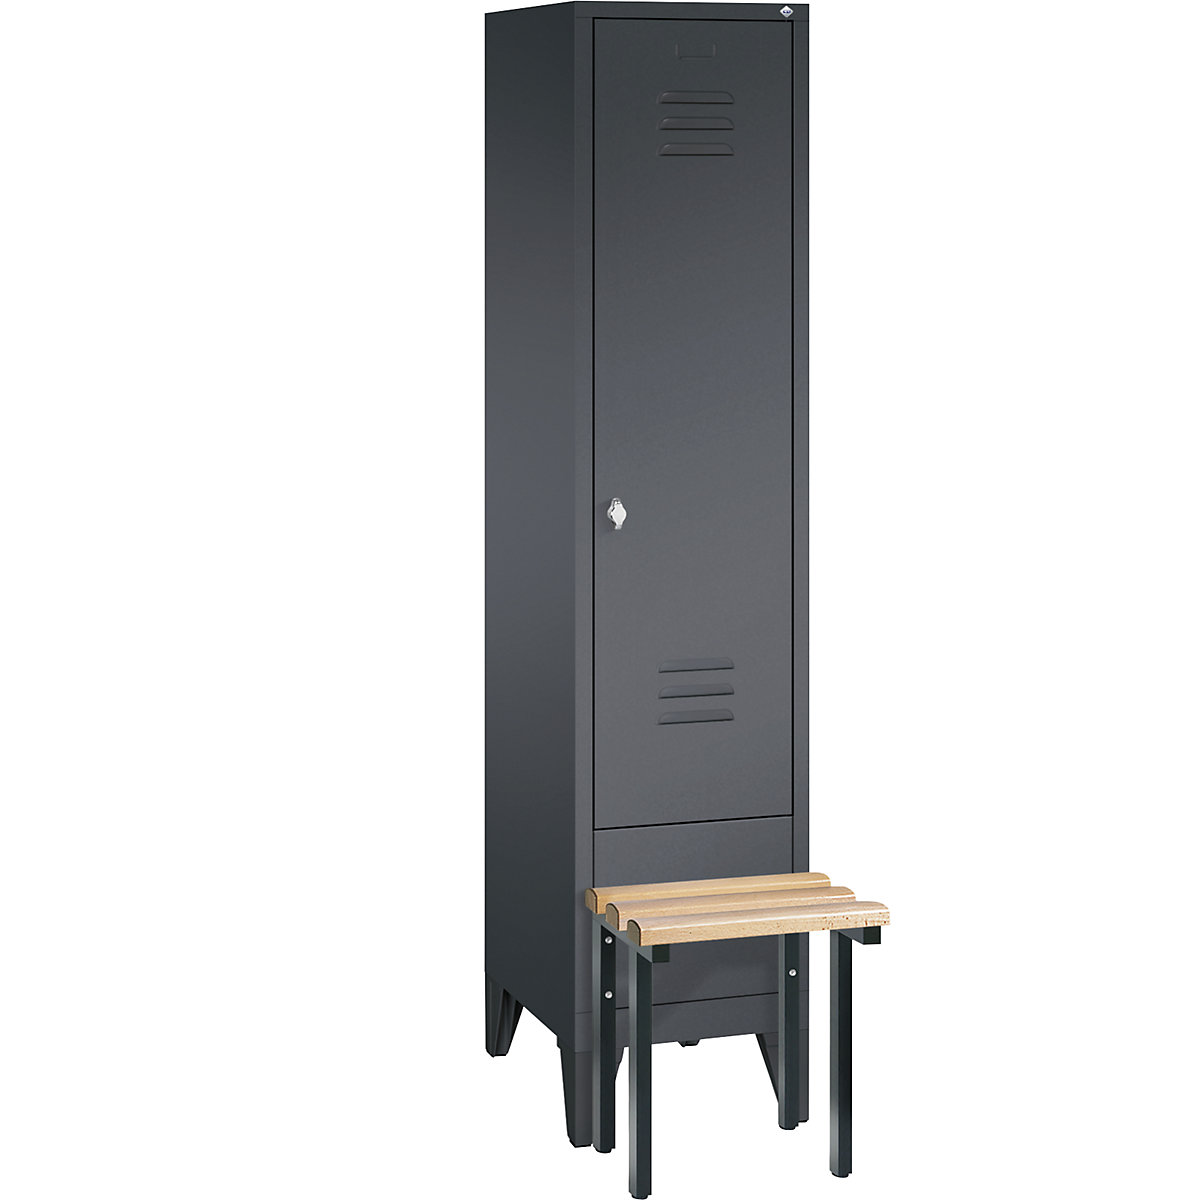 CLASSIC cloakroom locker with bench mounted in front – C+P, 1 compartment, compartment width 400 mm, black grey-8